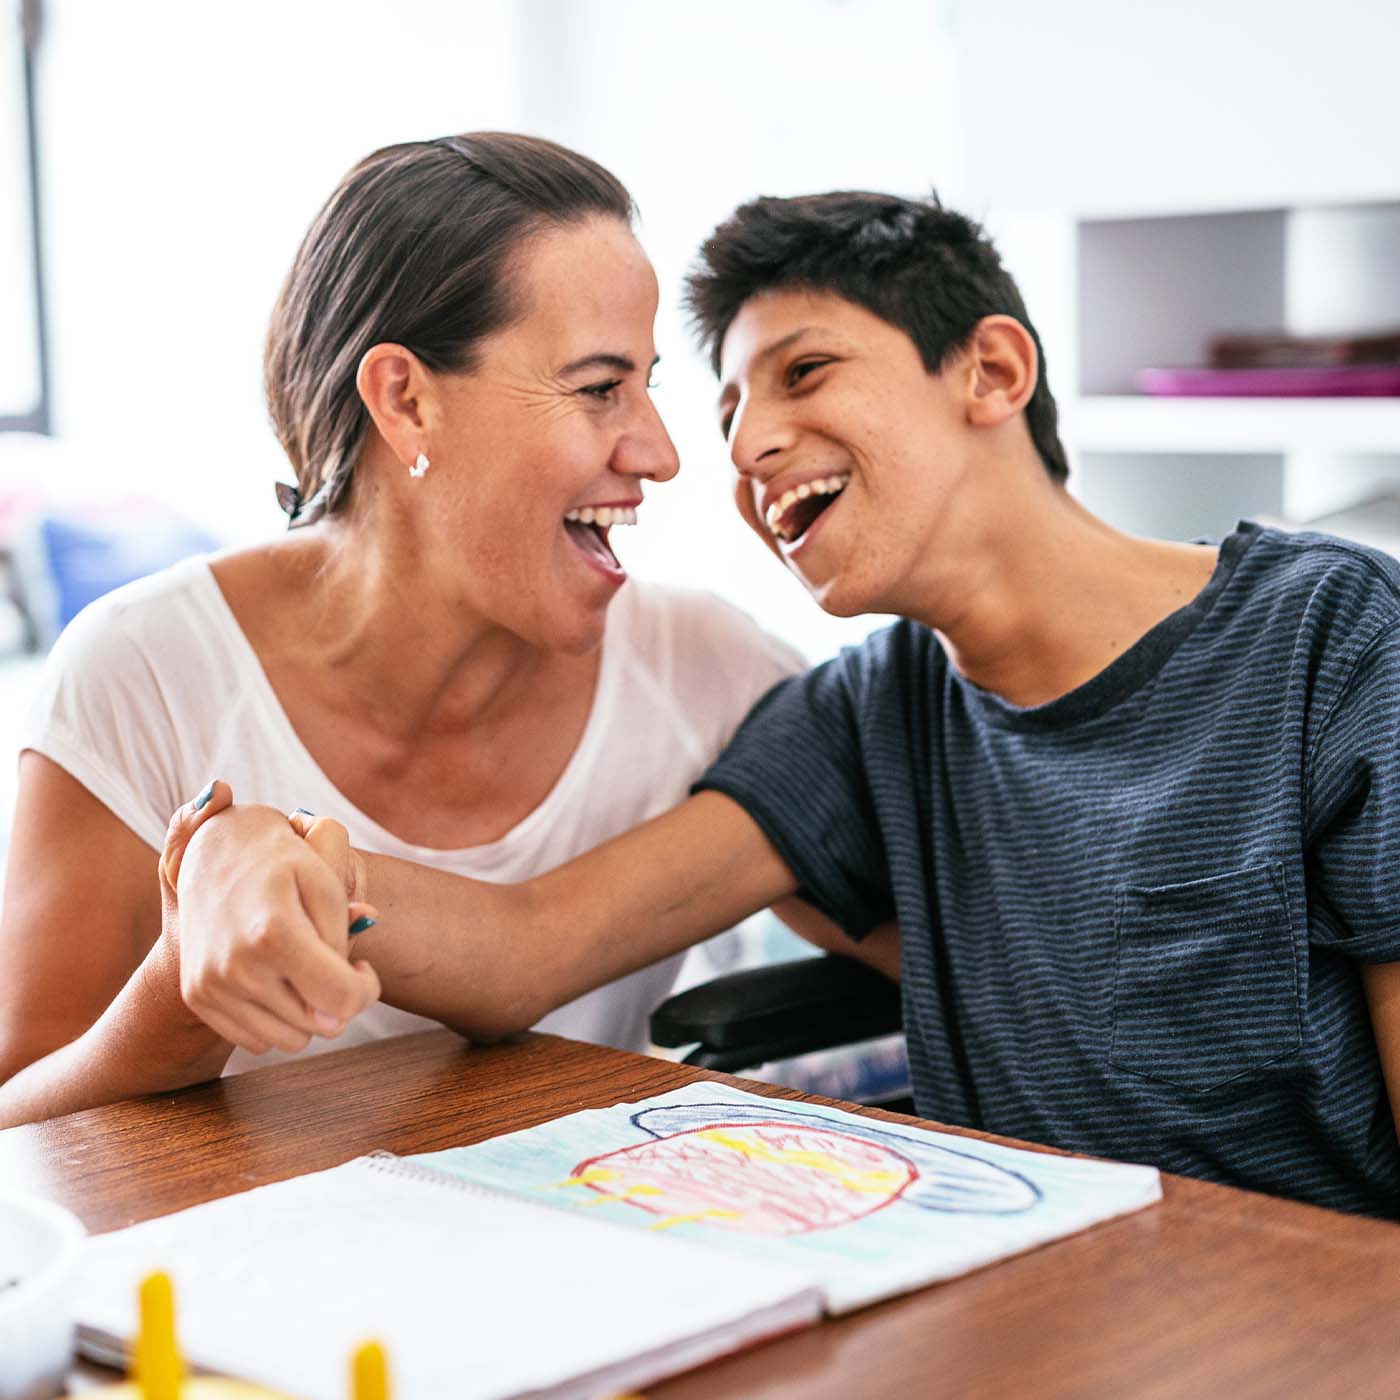 mom laughing with son who has intellectual disability-v2